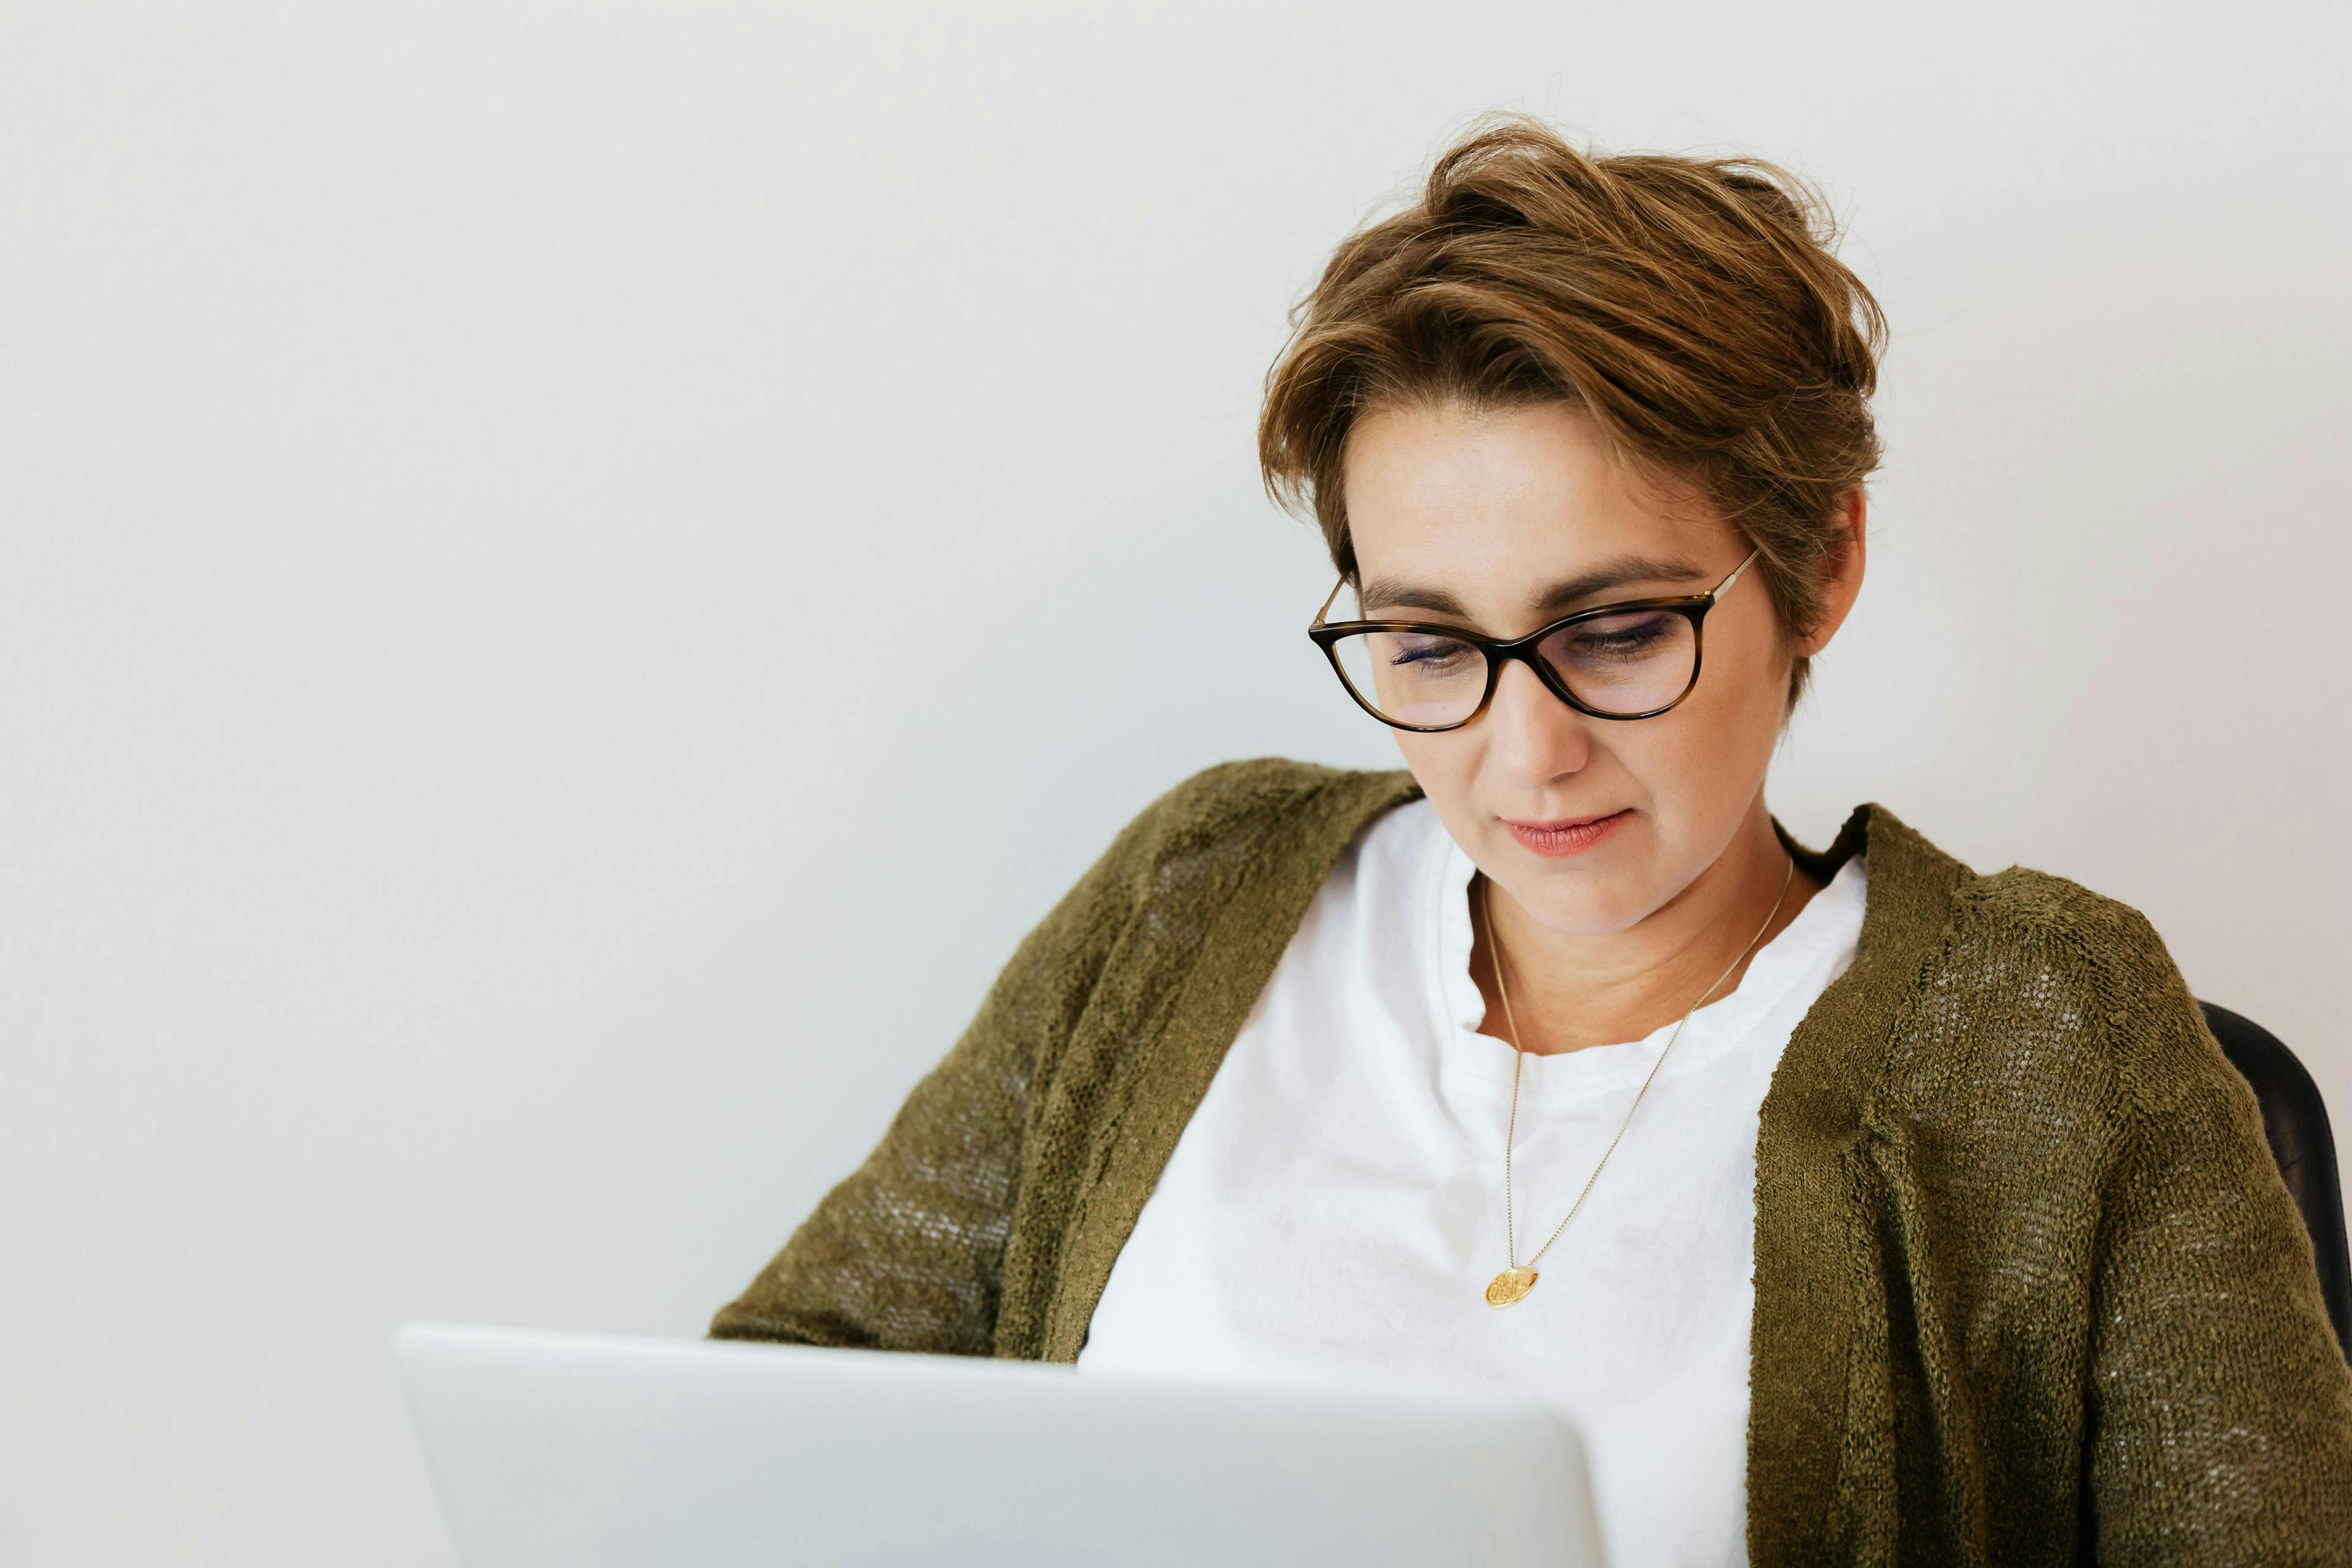 A woman with short hair and glasses working on a laptop, representing digital marketing services for small businesses.